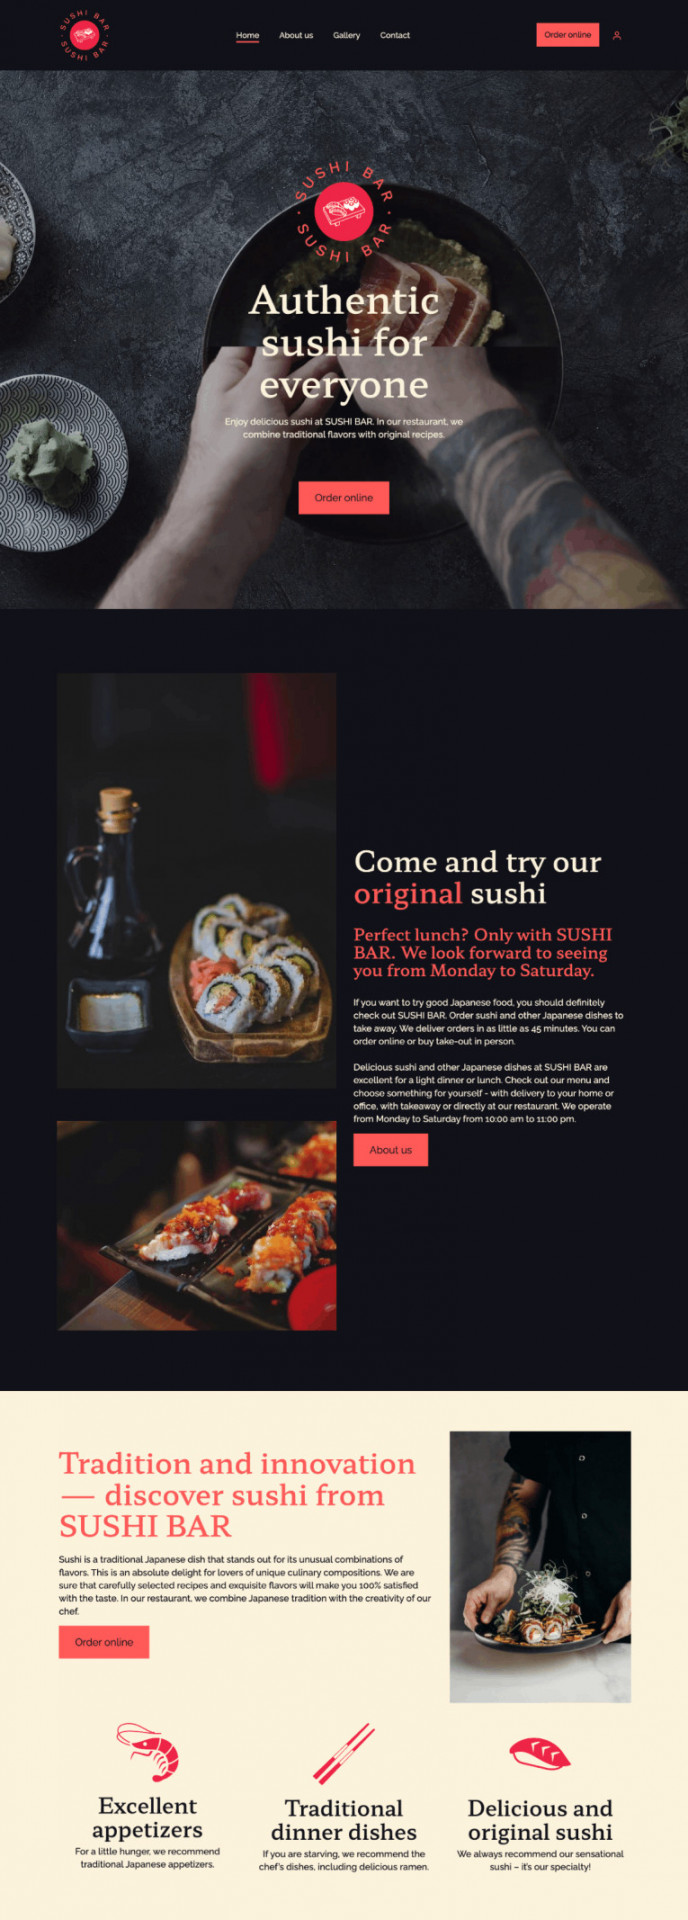  An example restaurant page for sushi restaurants